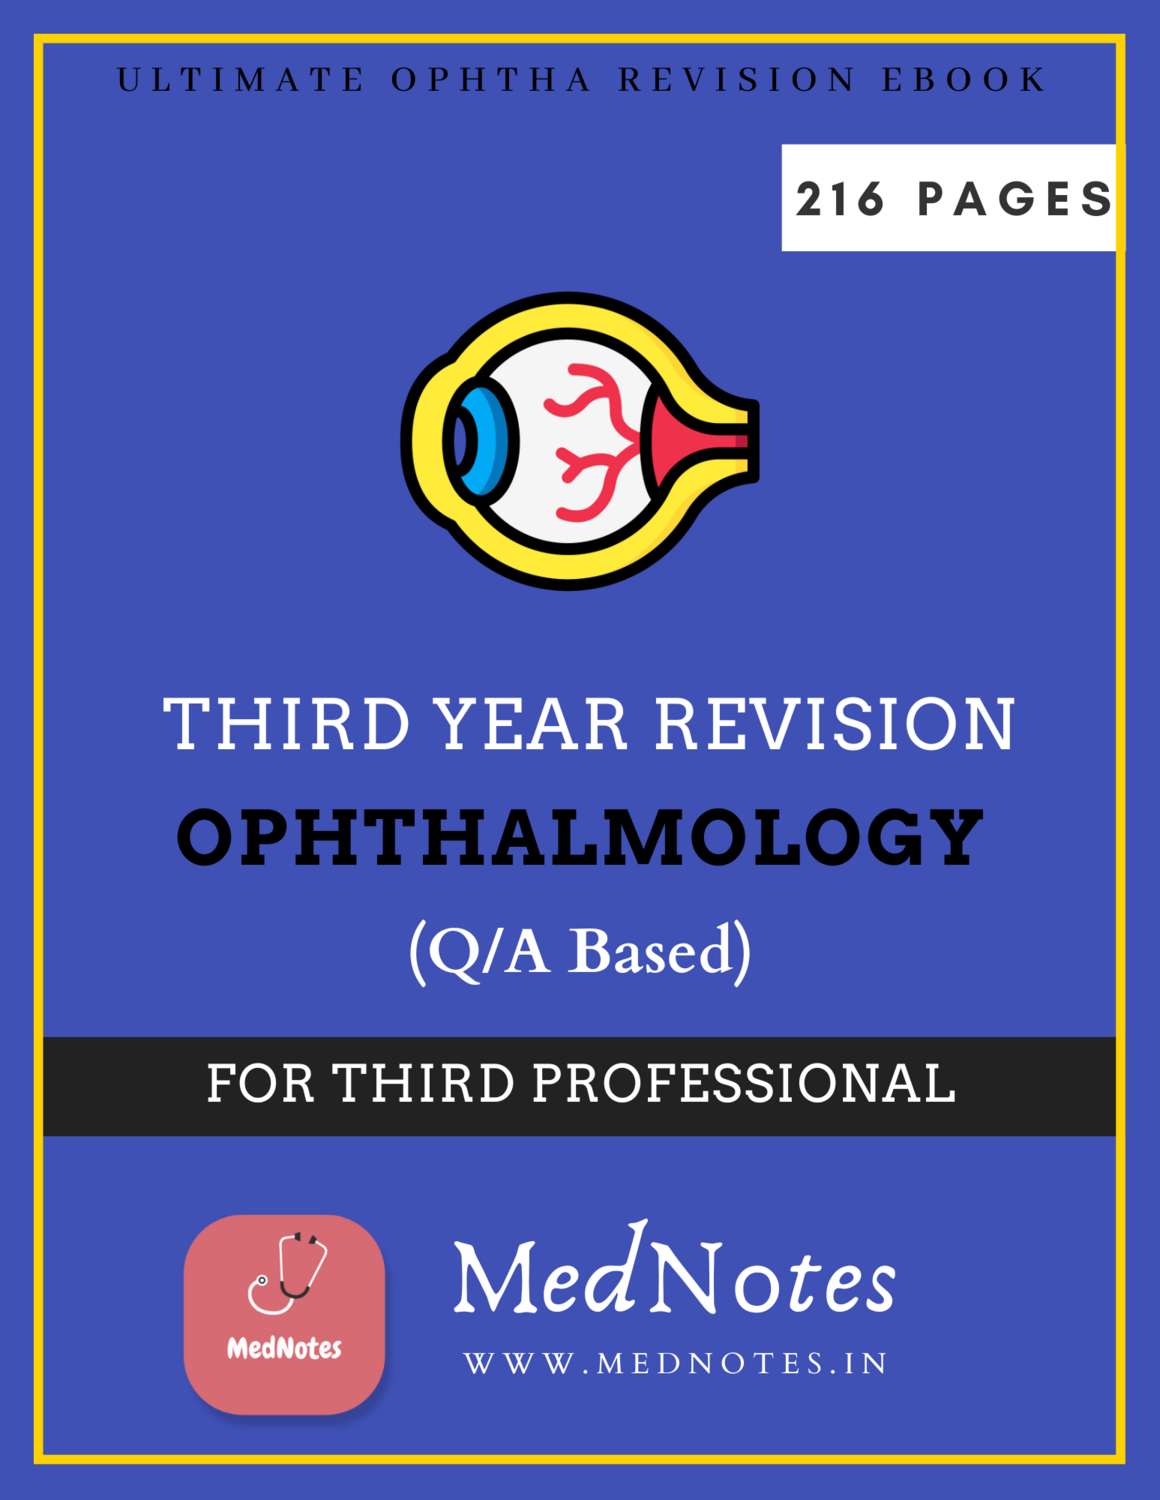 Full Ophthalmology Revision - For Third Professional